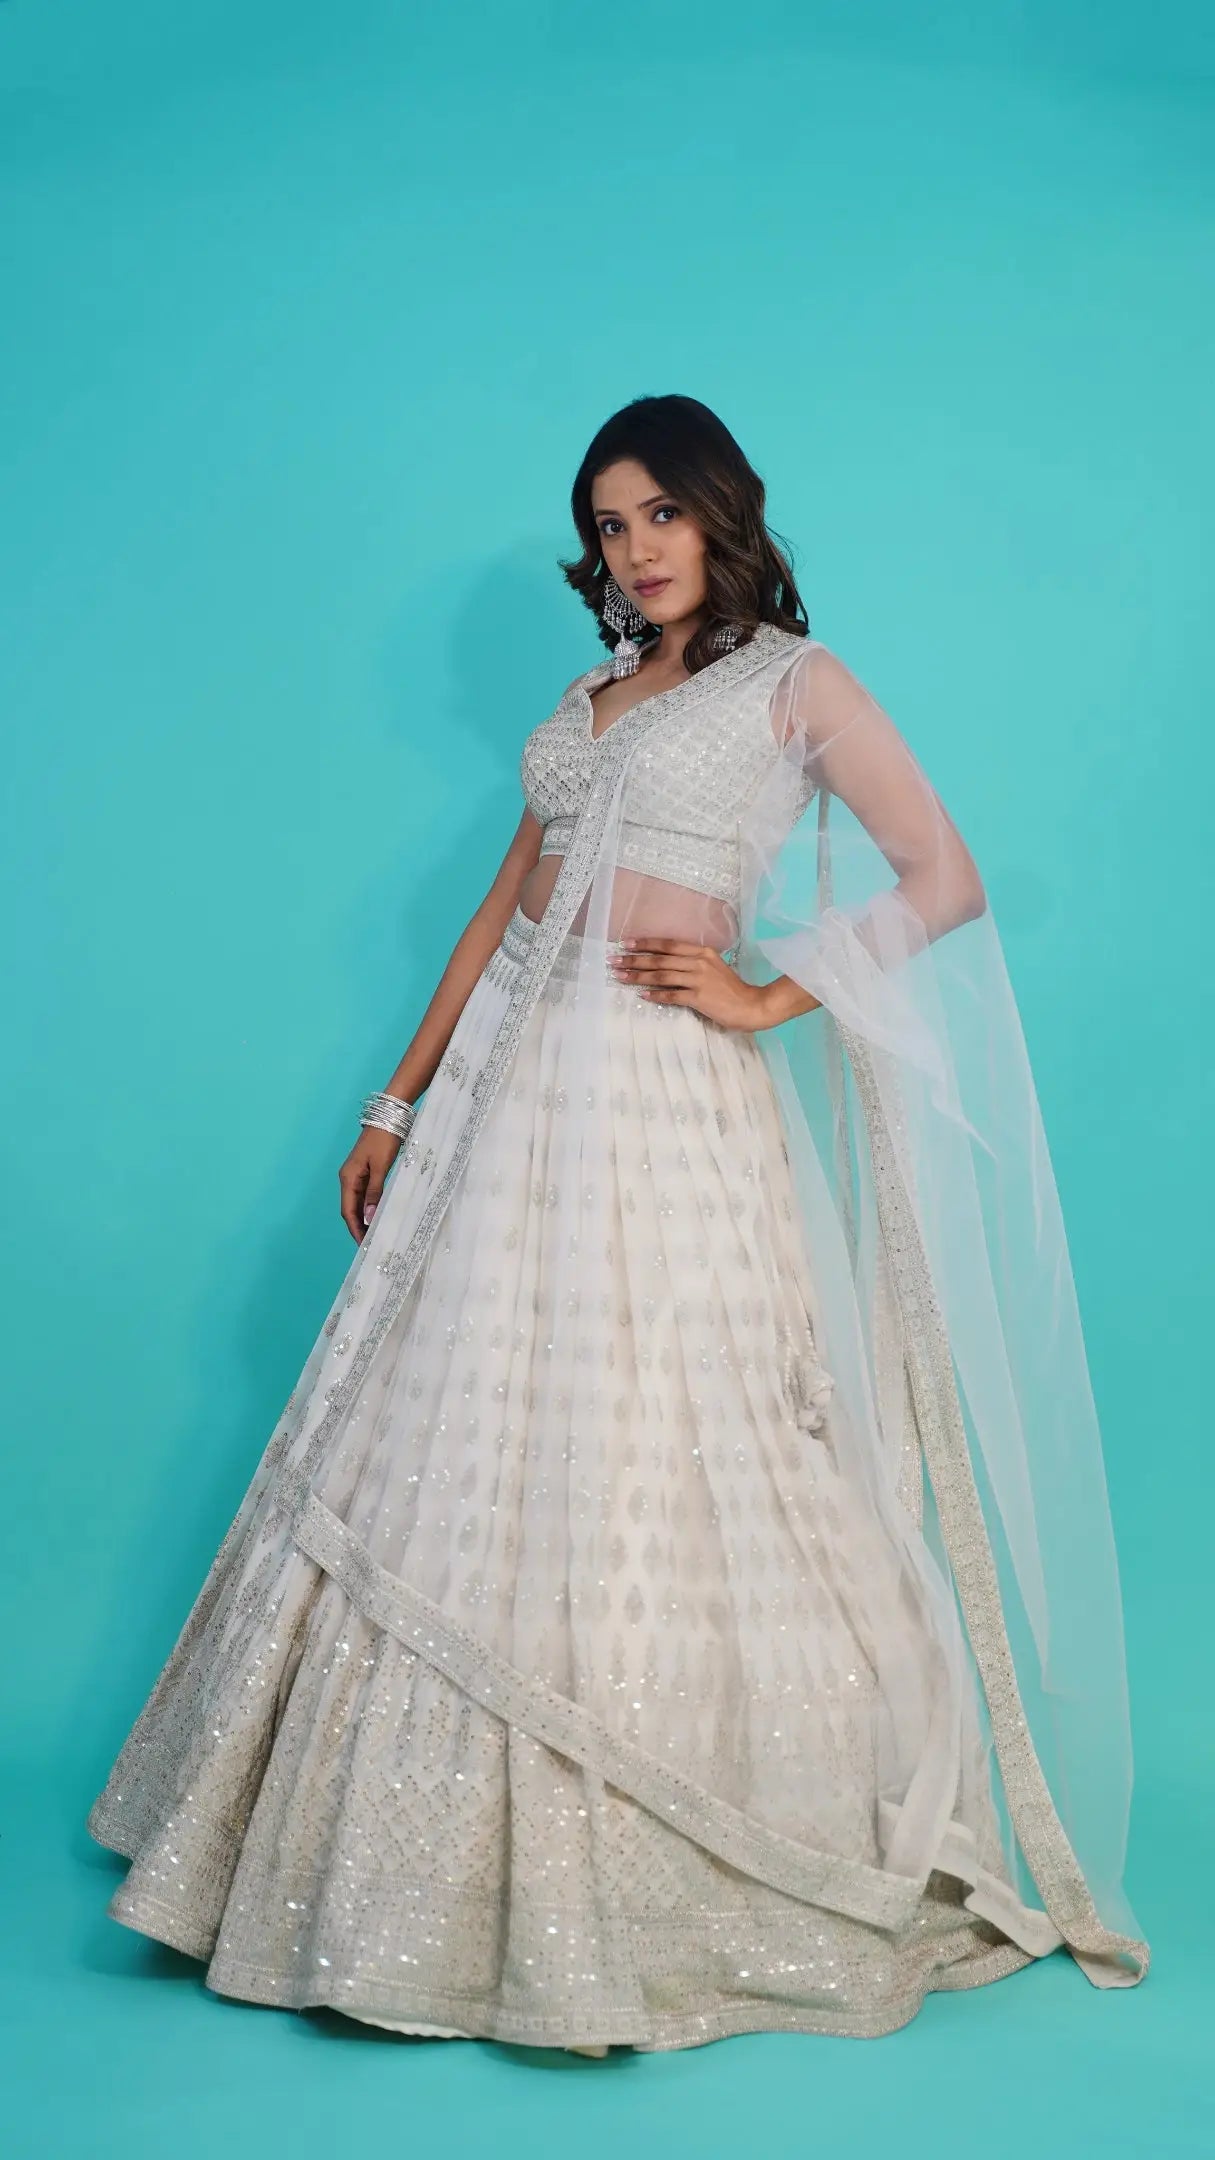 3 Gorgeous Lehengas Under Rs 5,000 To Add To Your Ethnic Wardrobe